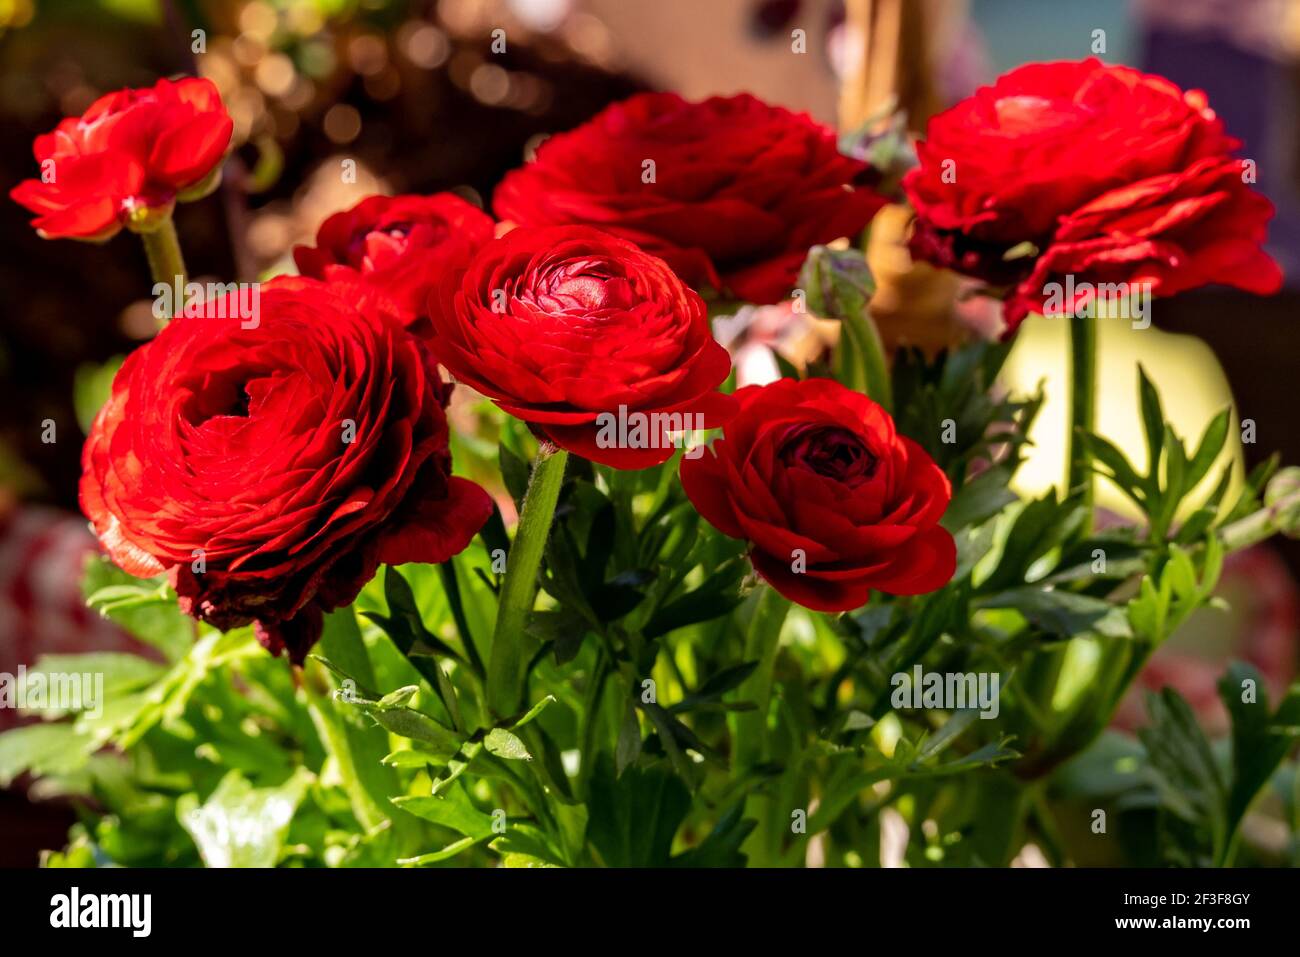 Red ranunculus flowers with bud and green plant stems, shallow depth of field, selective focus Stock Photo